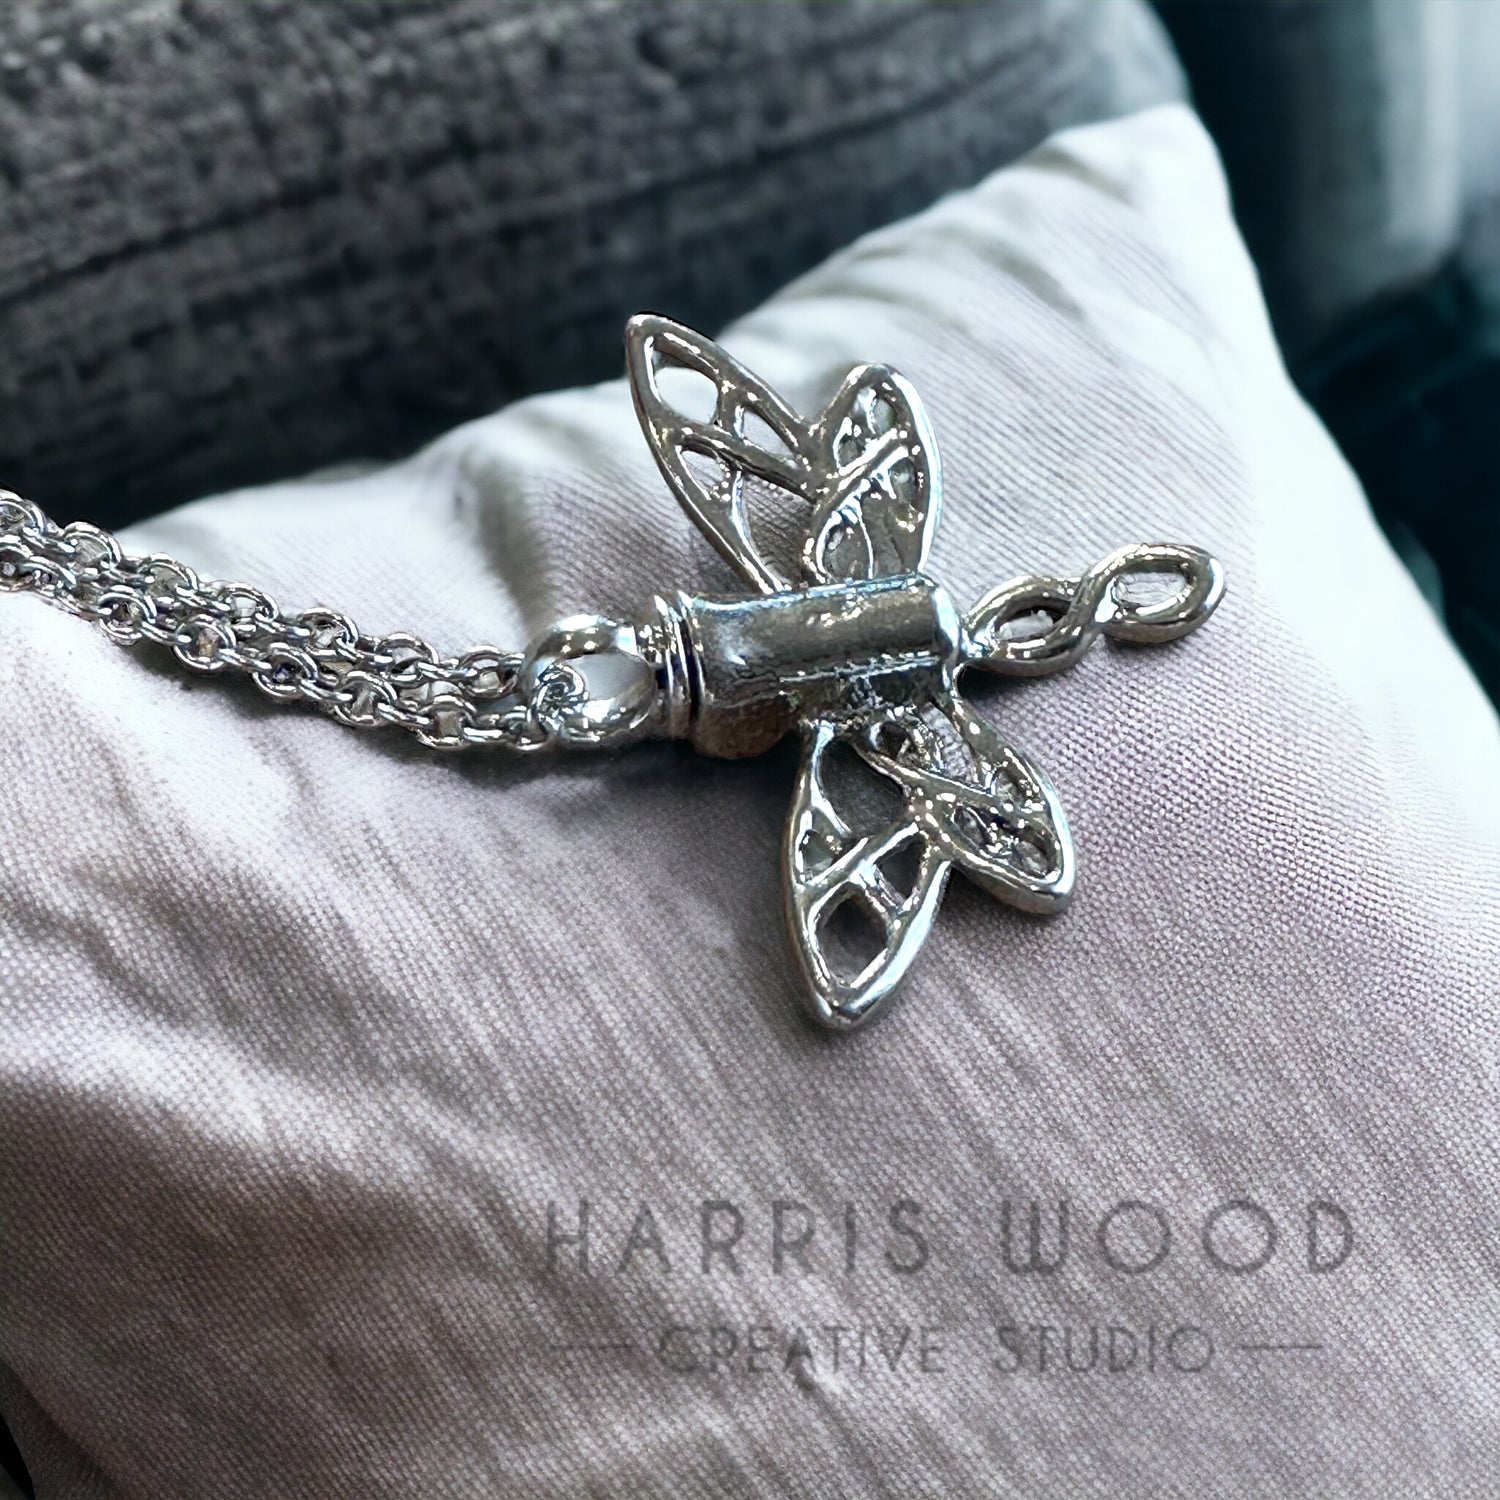 Dragonfly Urn Pendant and Chain